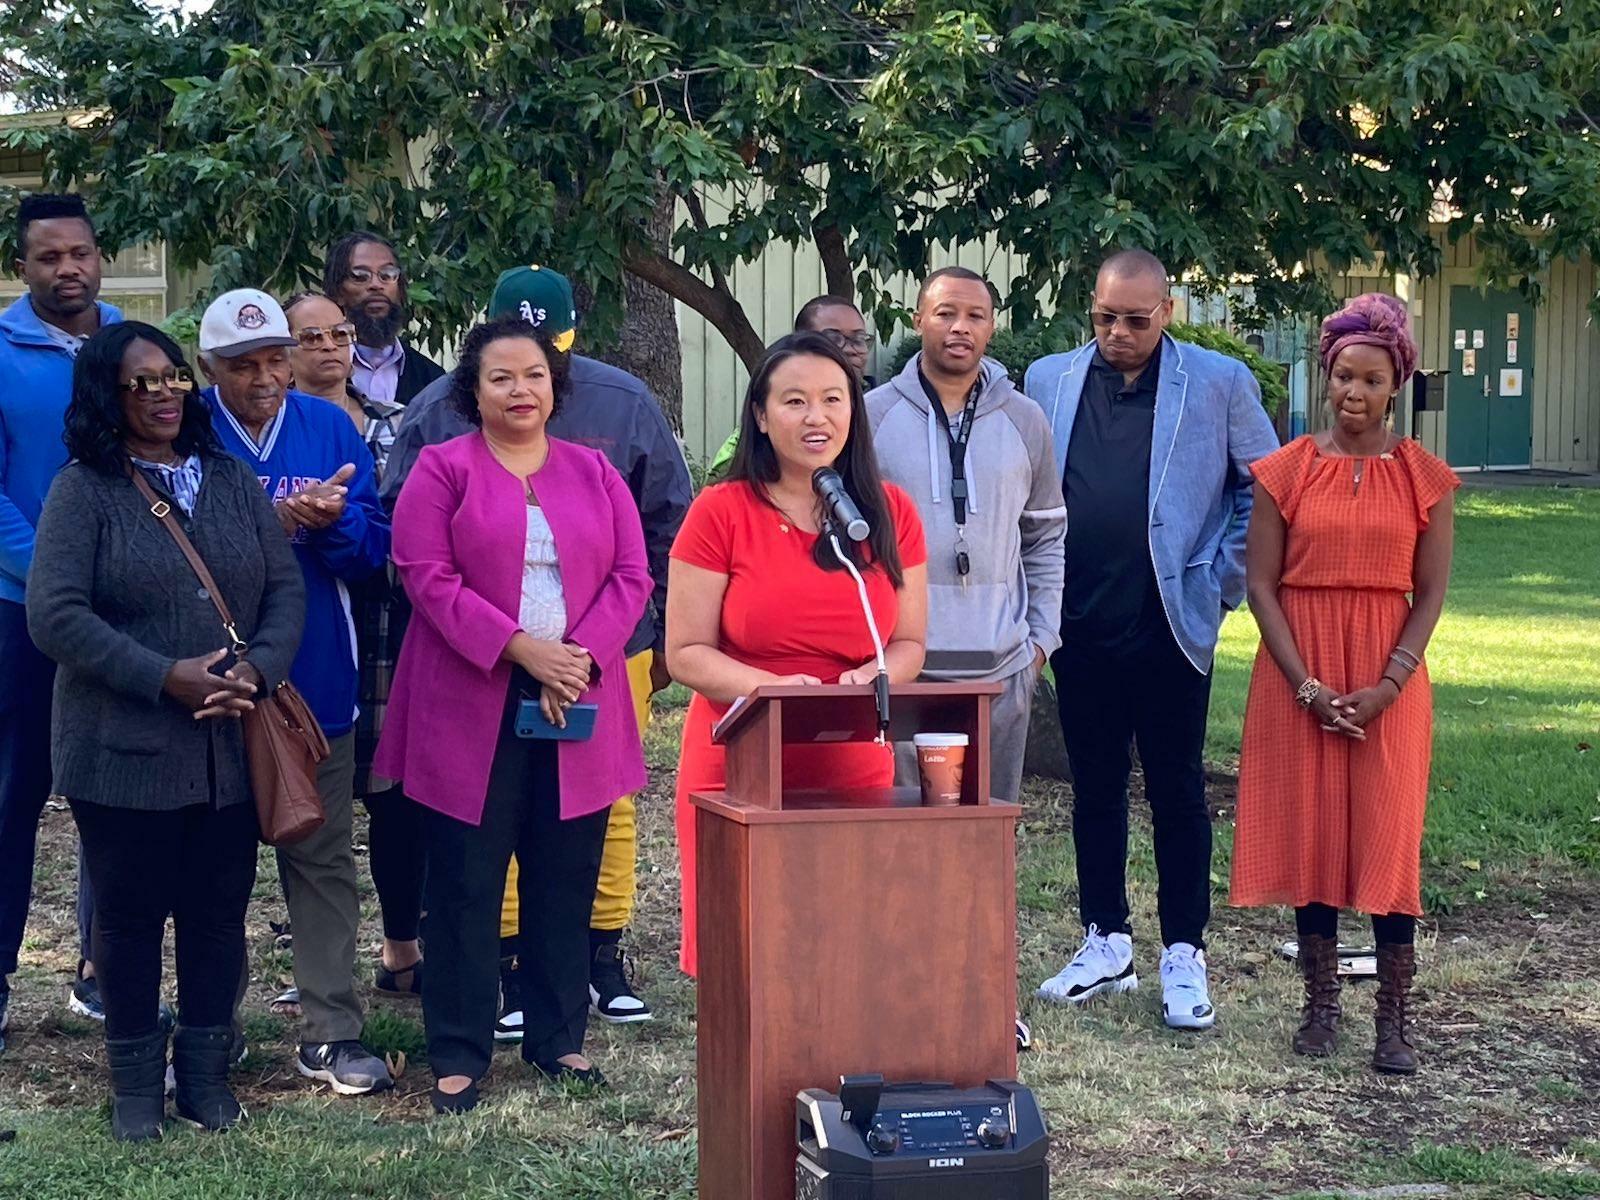 Council President Pro Tempore Sheng Thao announces a $2 million investment into East Oakland parks at a press conference surrounded by community members and Mia Bonta